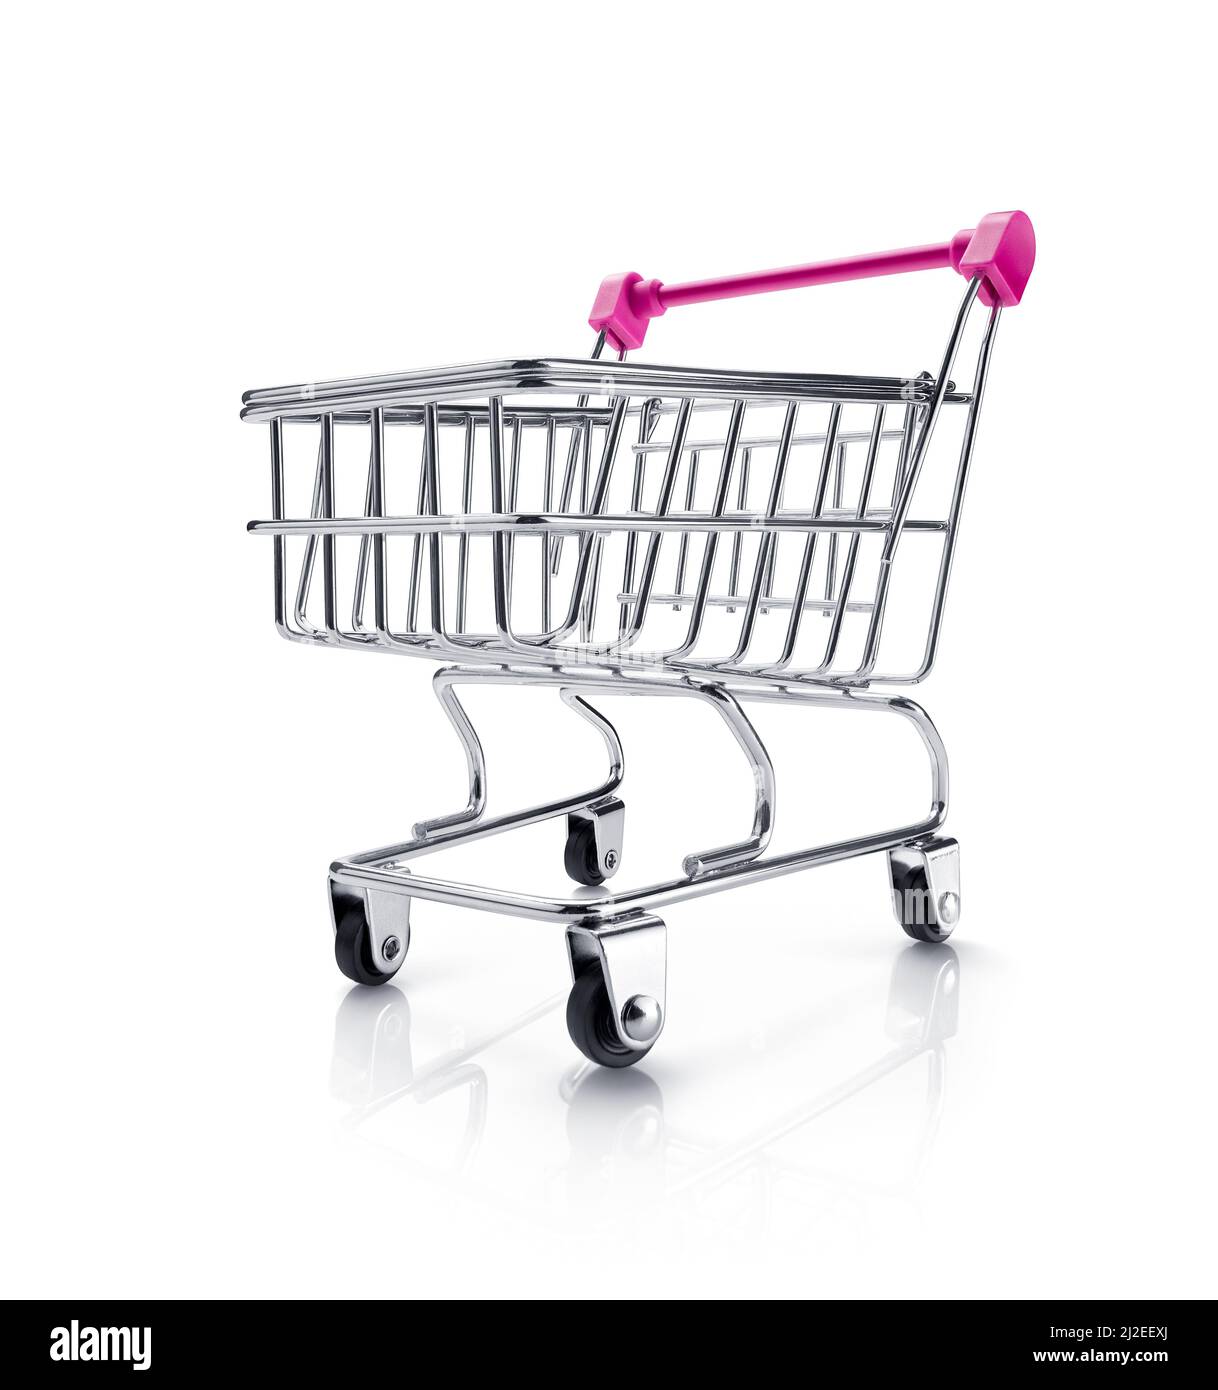 Low angle view of shopping cart over white background Stock Photo